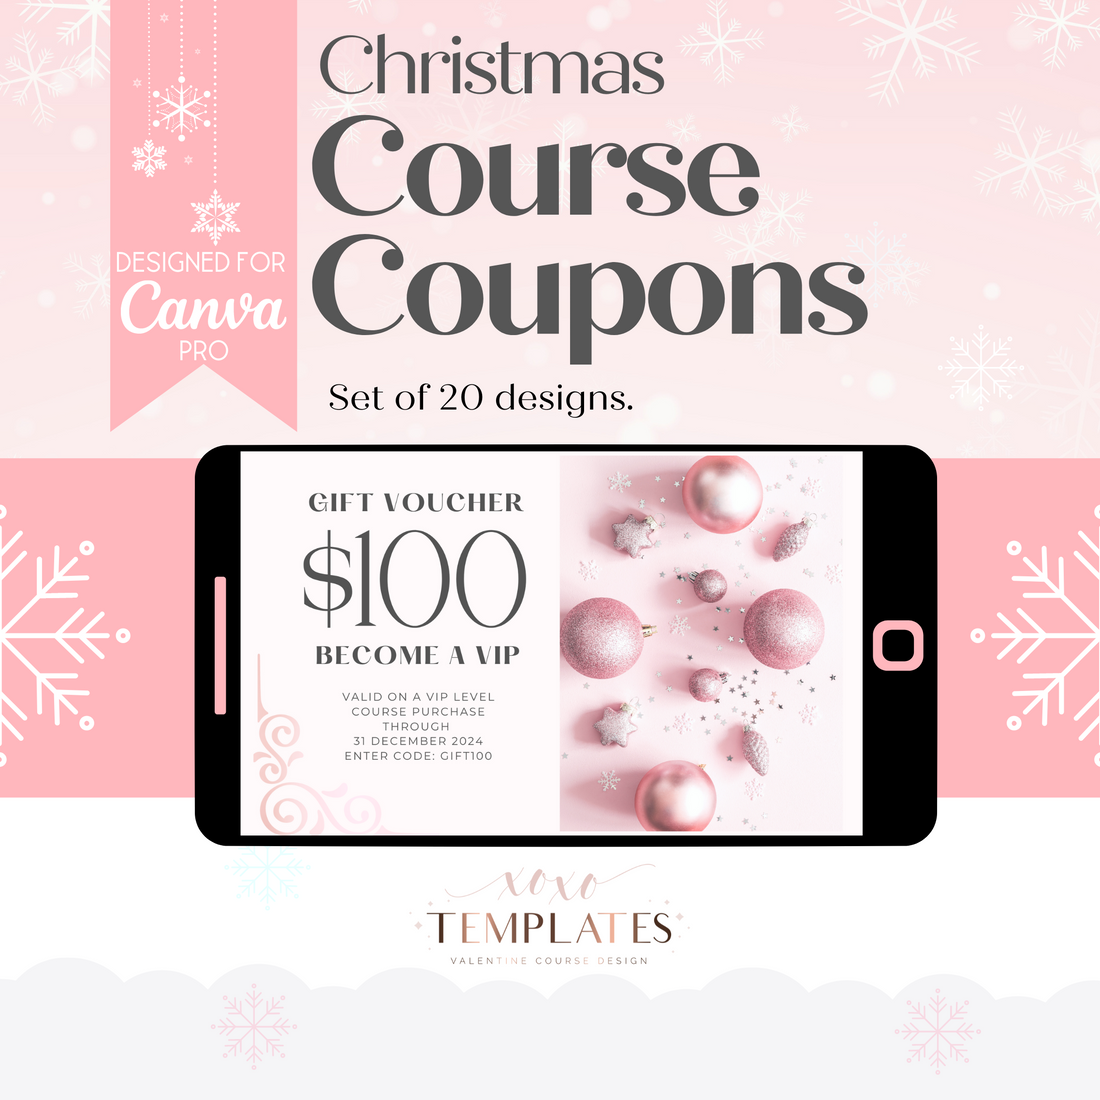 Christmas Course Coupons